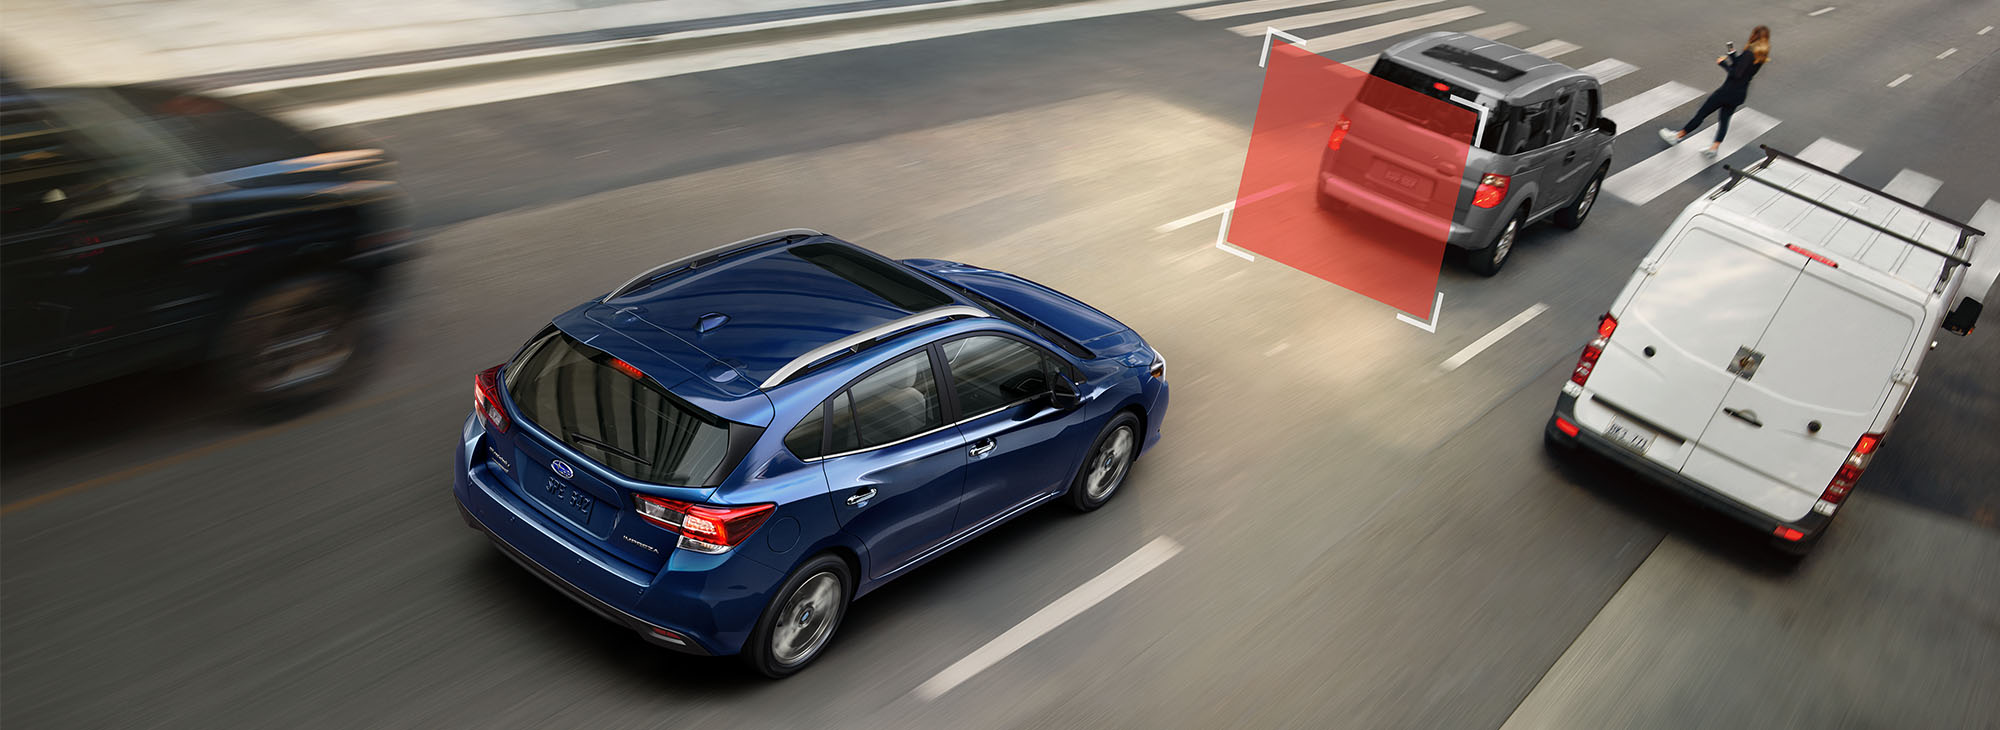  A photo illustration showing Automatic Pre-Collision Braking feature of the 2023 Impreza hatchback.